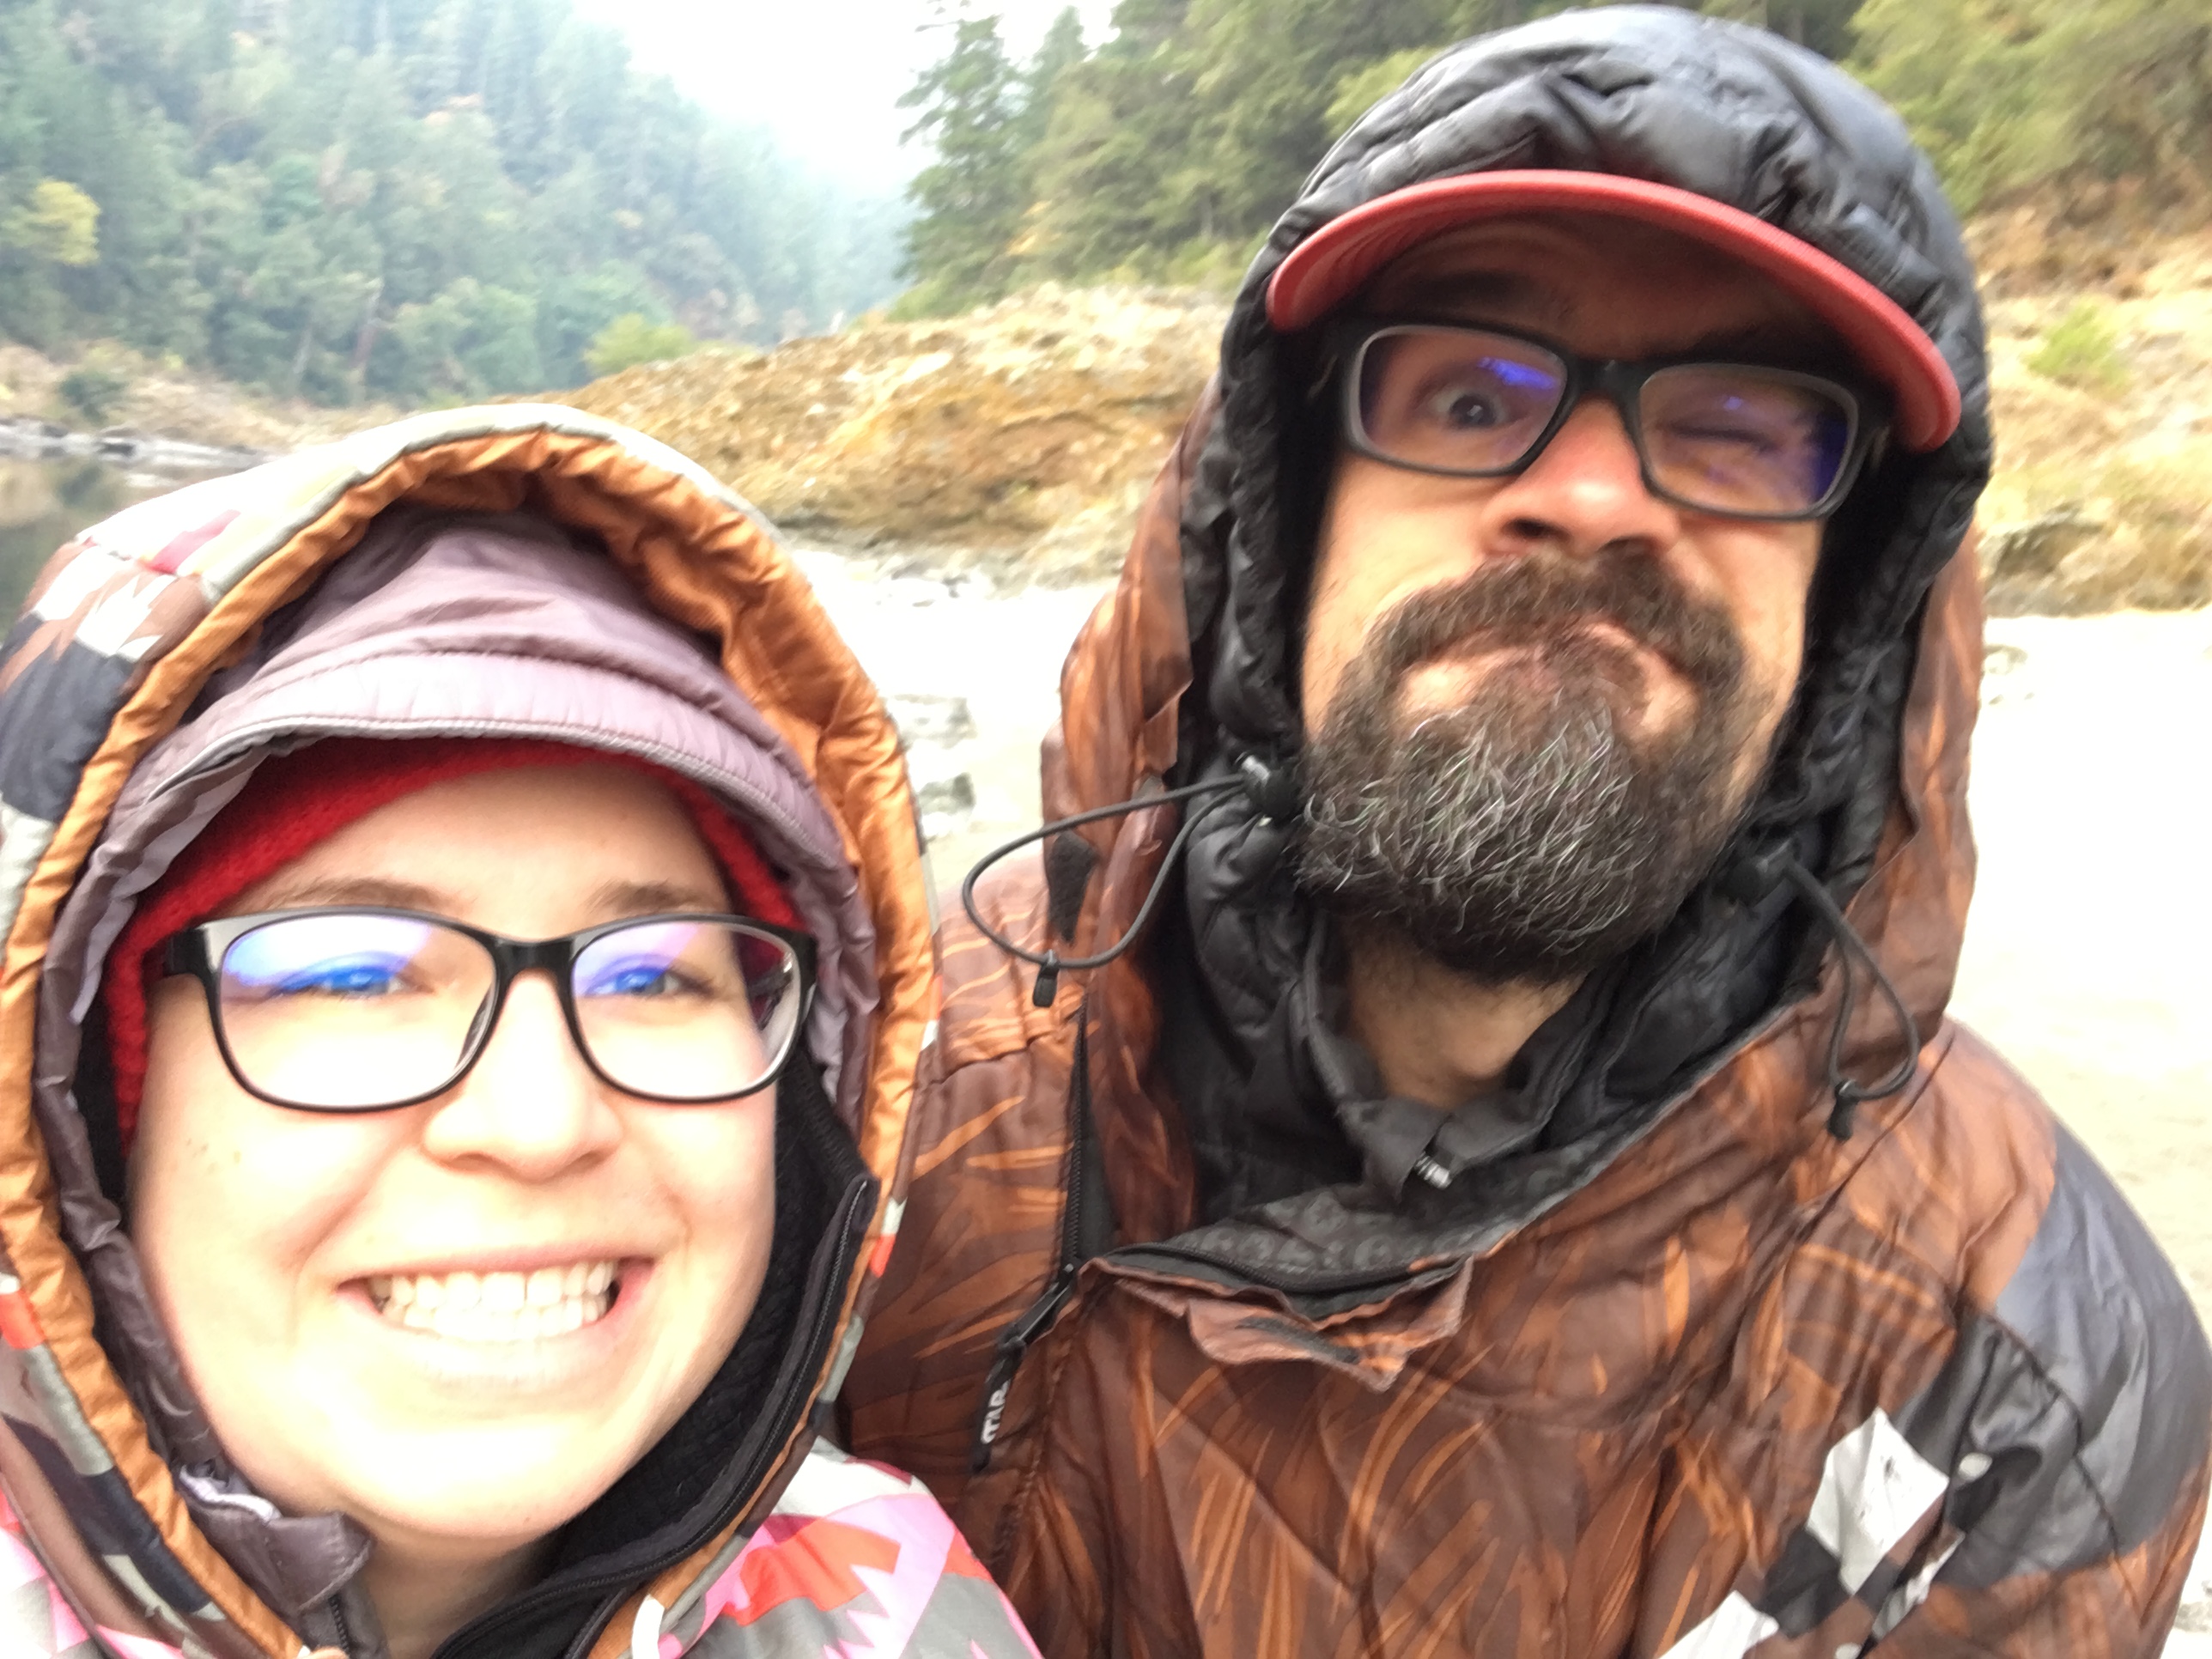 Ashely Drake and her husband smile while taking a selfie photo wearing rain gear